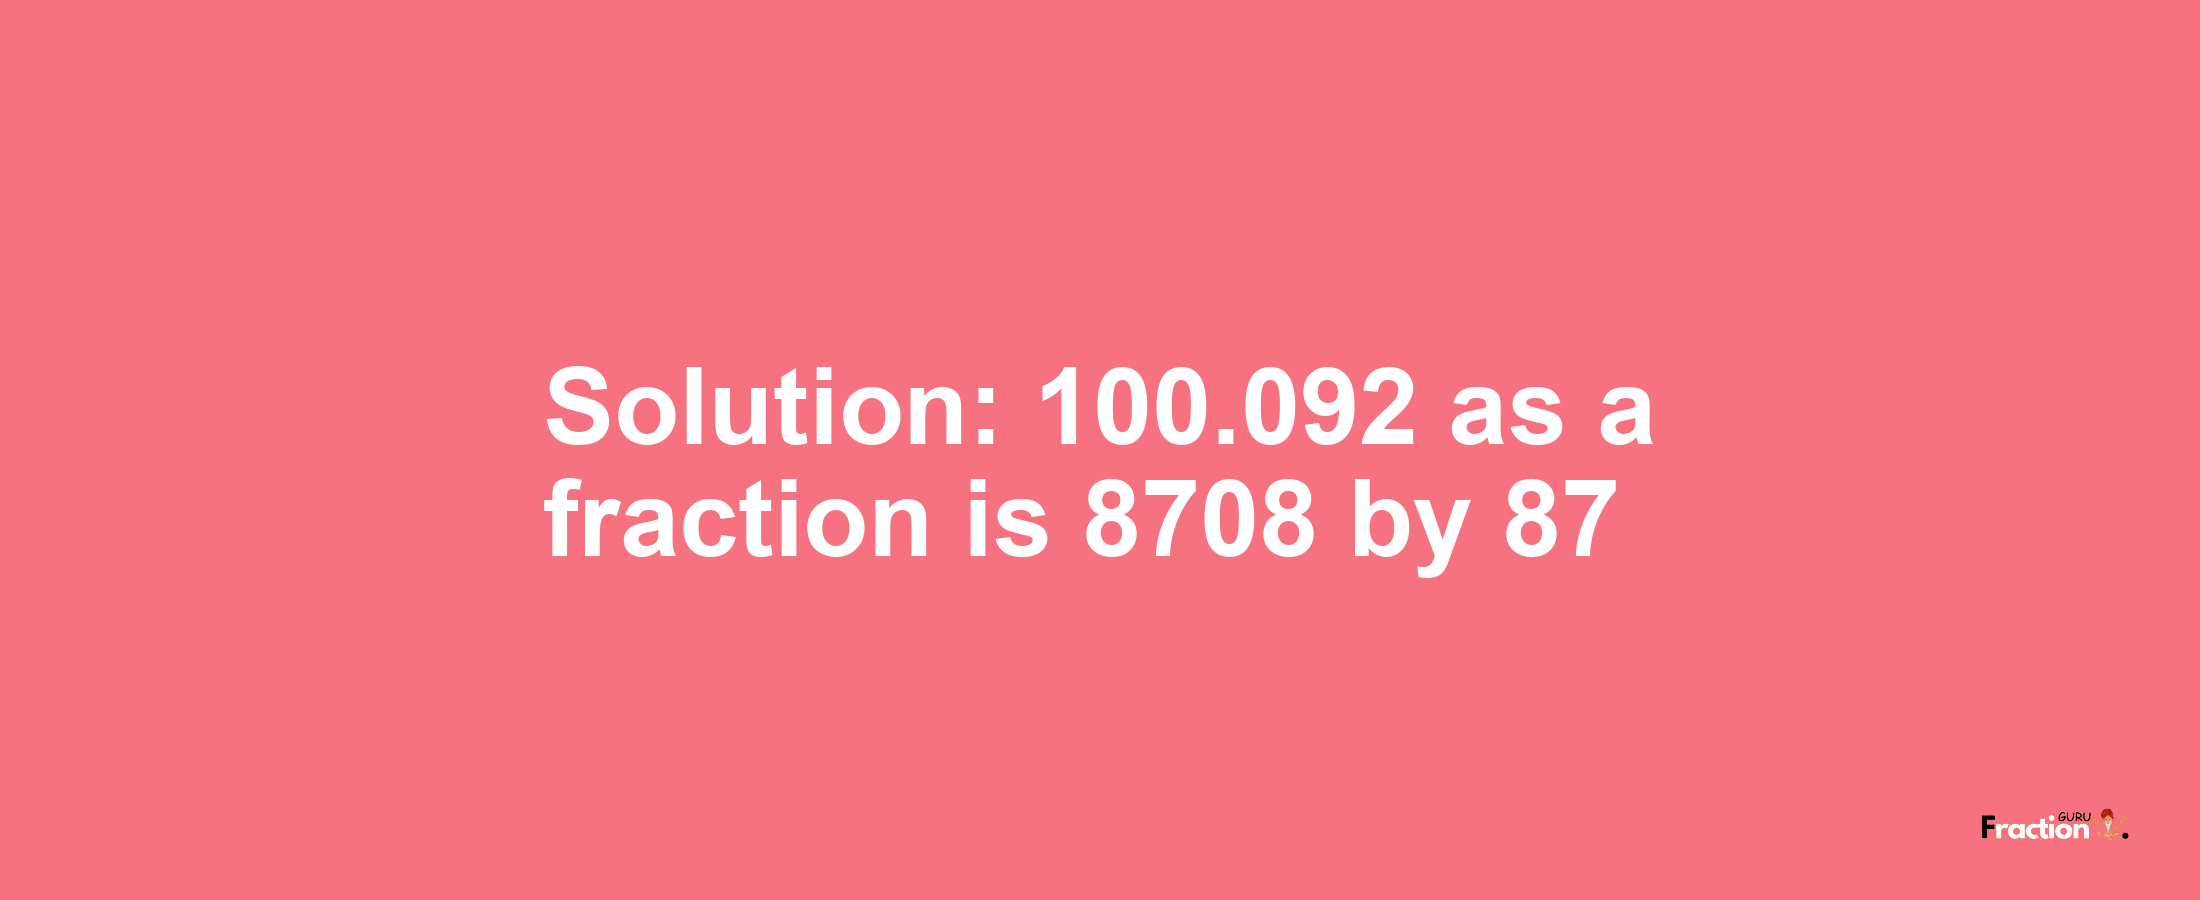 Solution:100.092 as a fraction is 8708/87